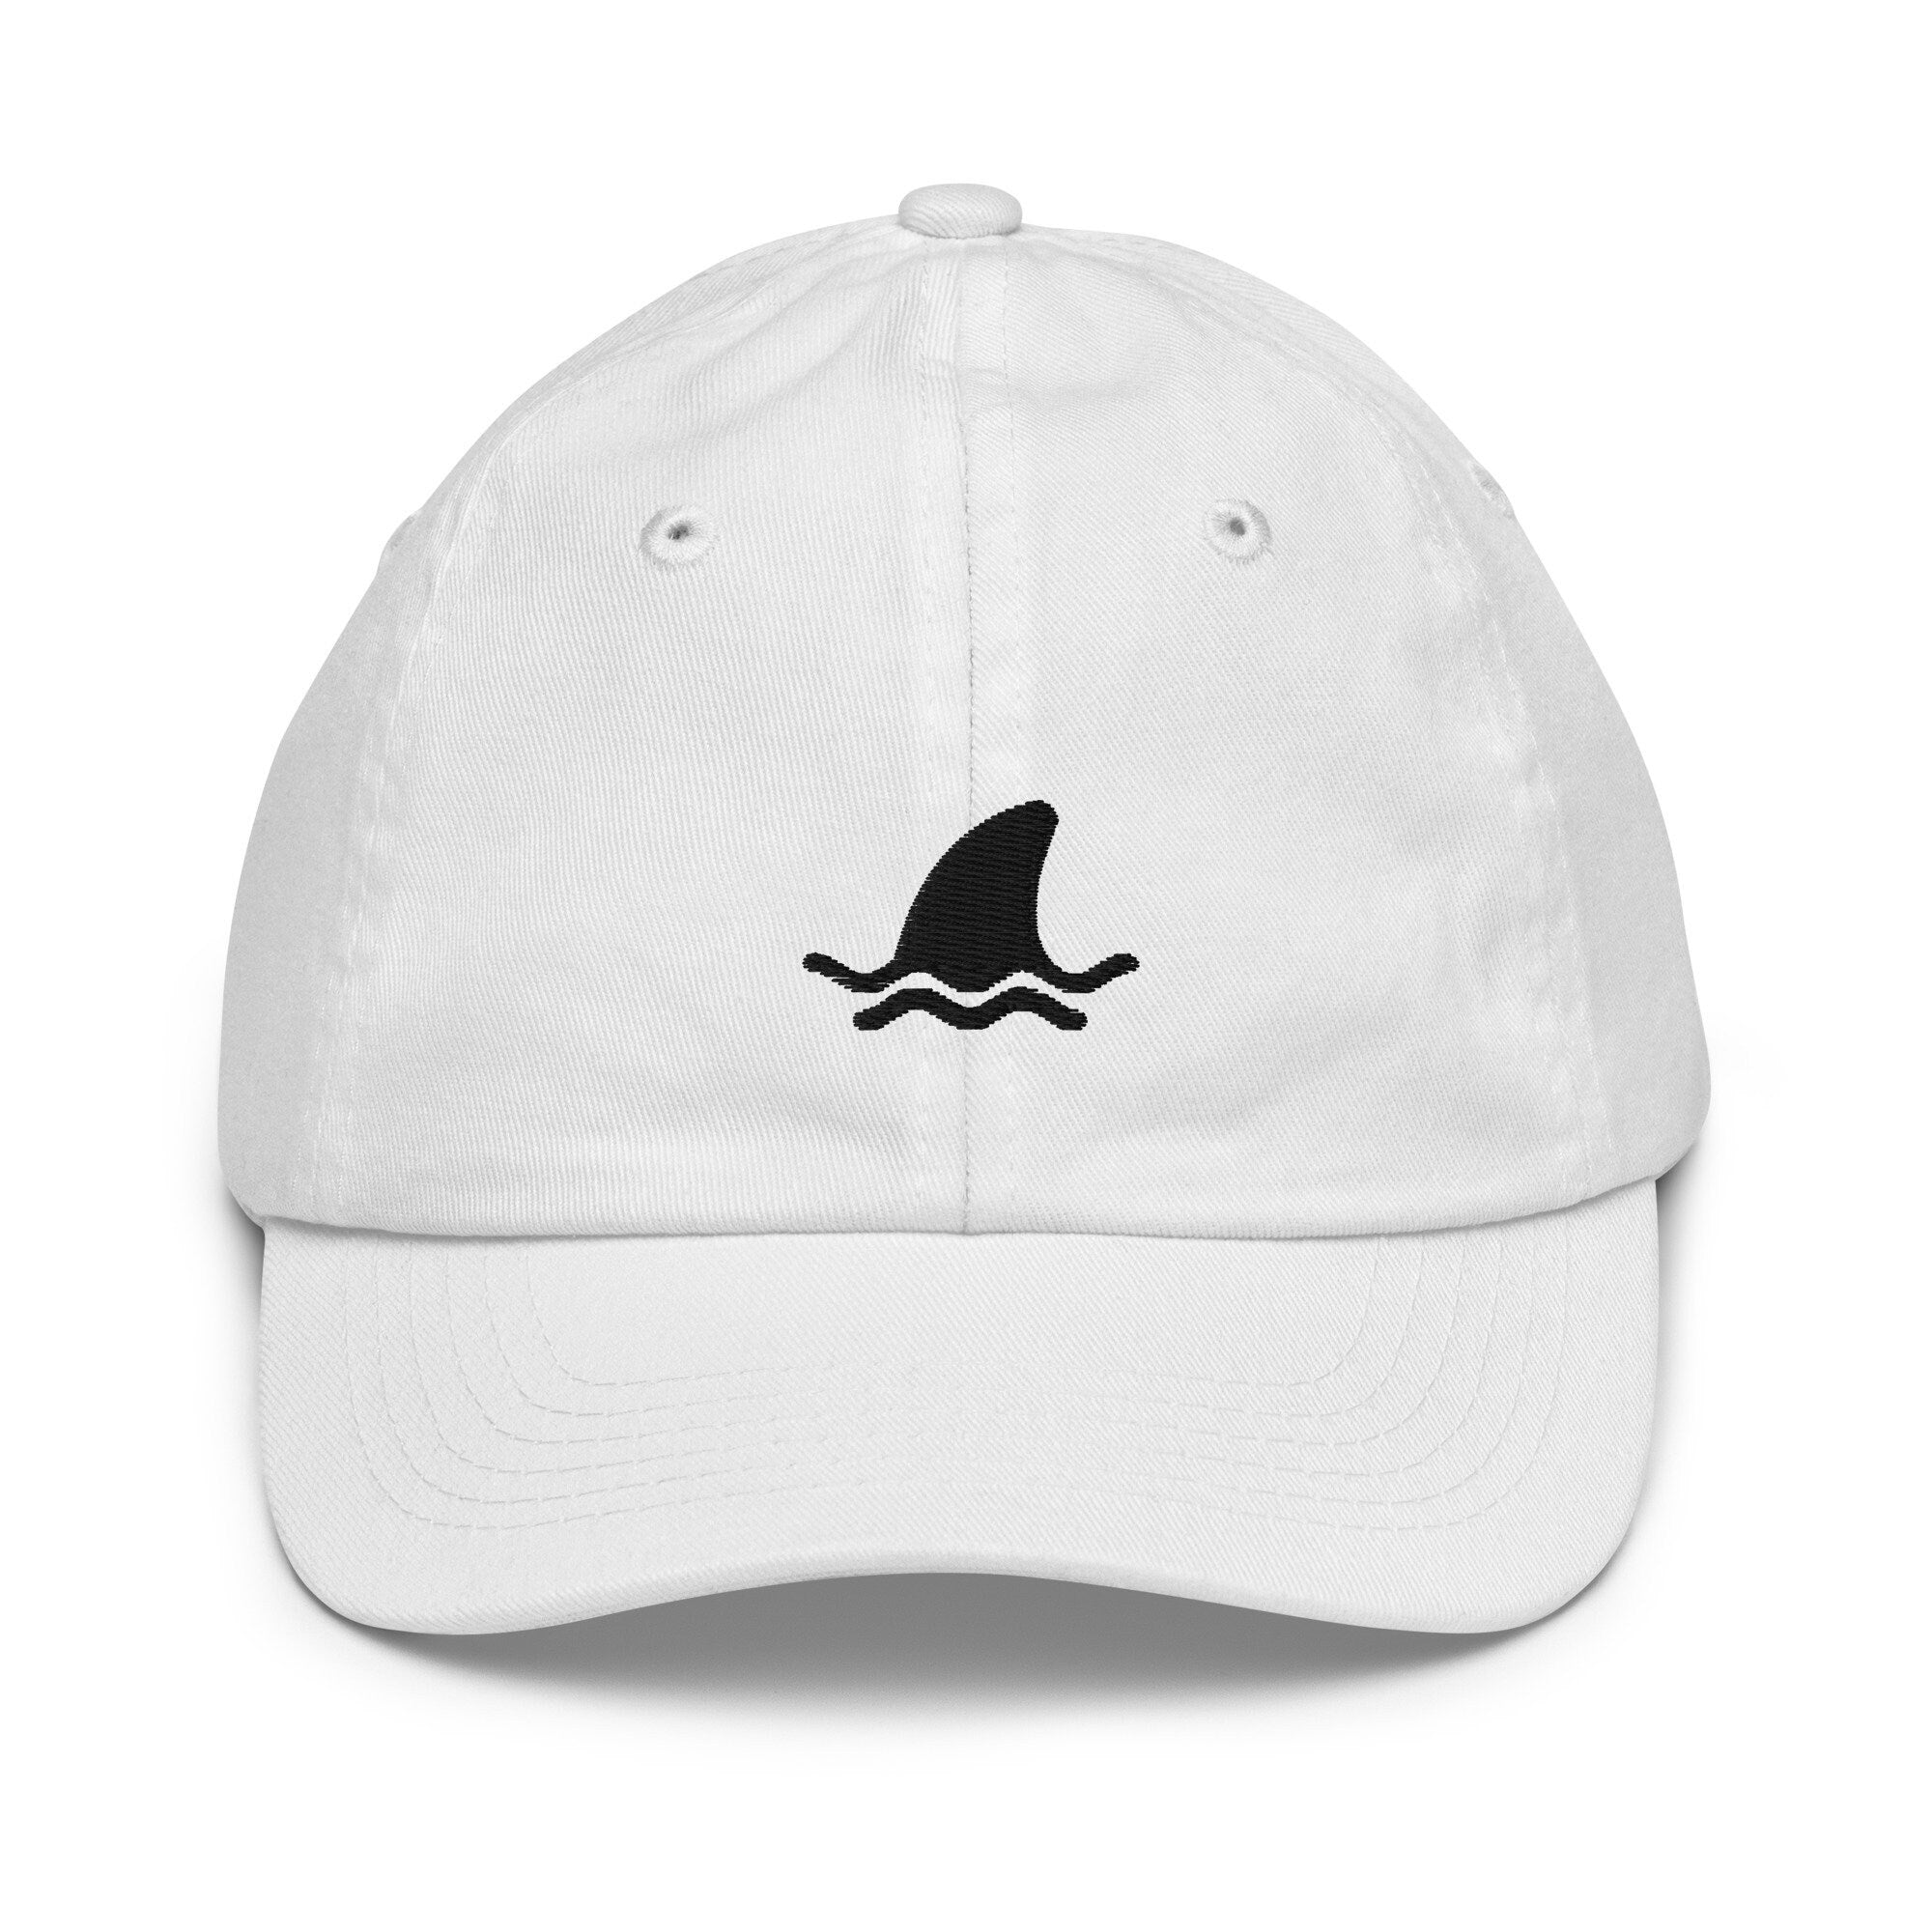 Shark Fin Youth Baseball Cap, Handmade Kids Hat, Embroidered Childrens Hat Gift - Multiple Colors